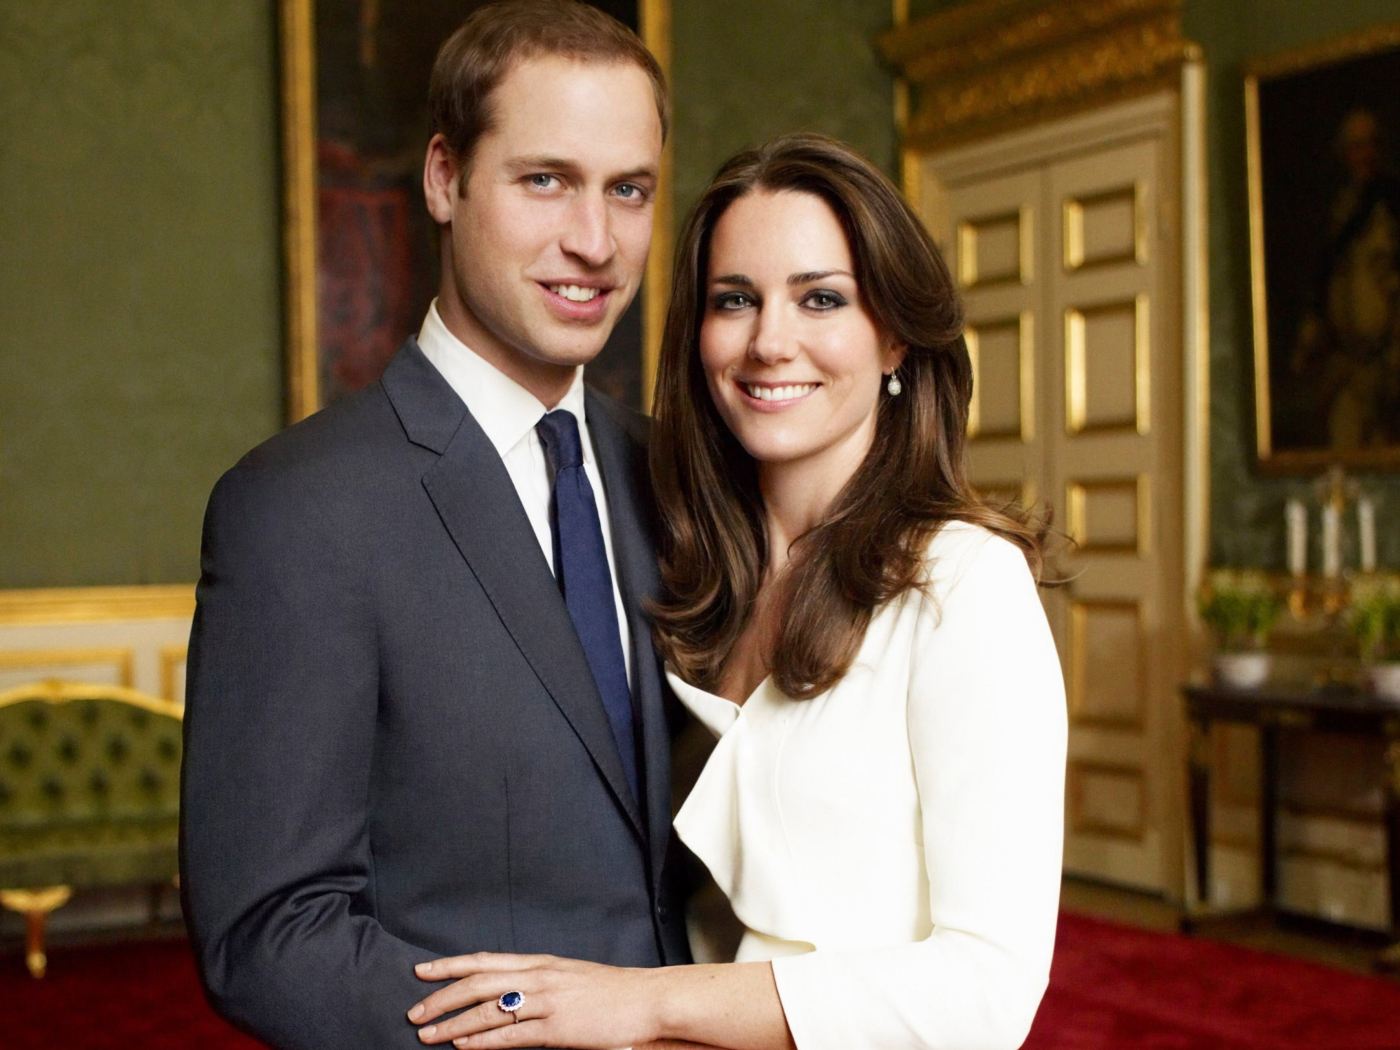 Prince William And Kate Middleton screenshot #1 1400x1050